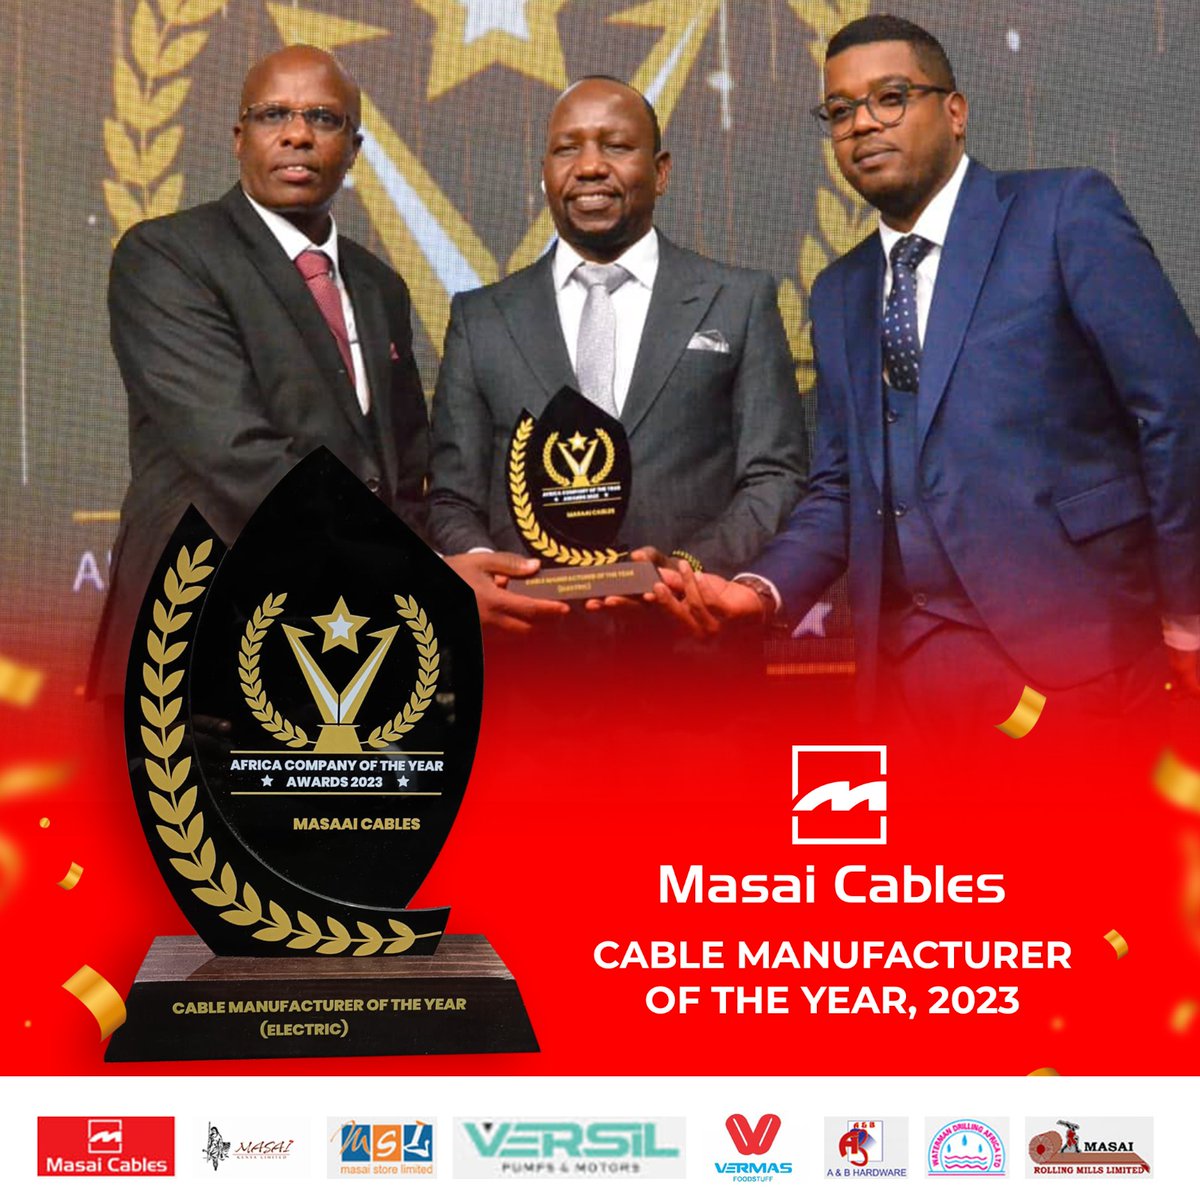 Celebrating a remarkable milestone! 🎉🏅 Masai Cables Ltd. 
Thank you for your unwavering support!
#masaicables #electricalcables #cablemanufacturer #acoya2023 #africacompanyoftheyearawards #companyawards #awards#excellenceawards